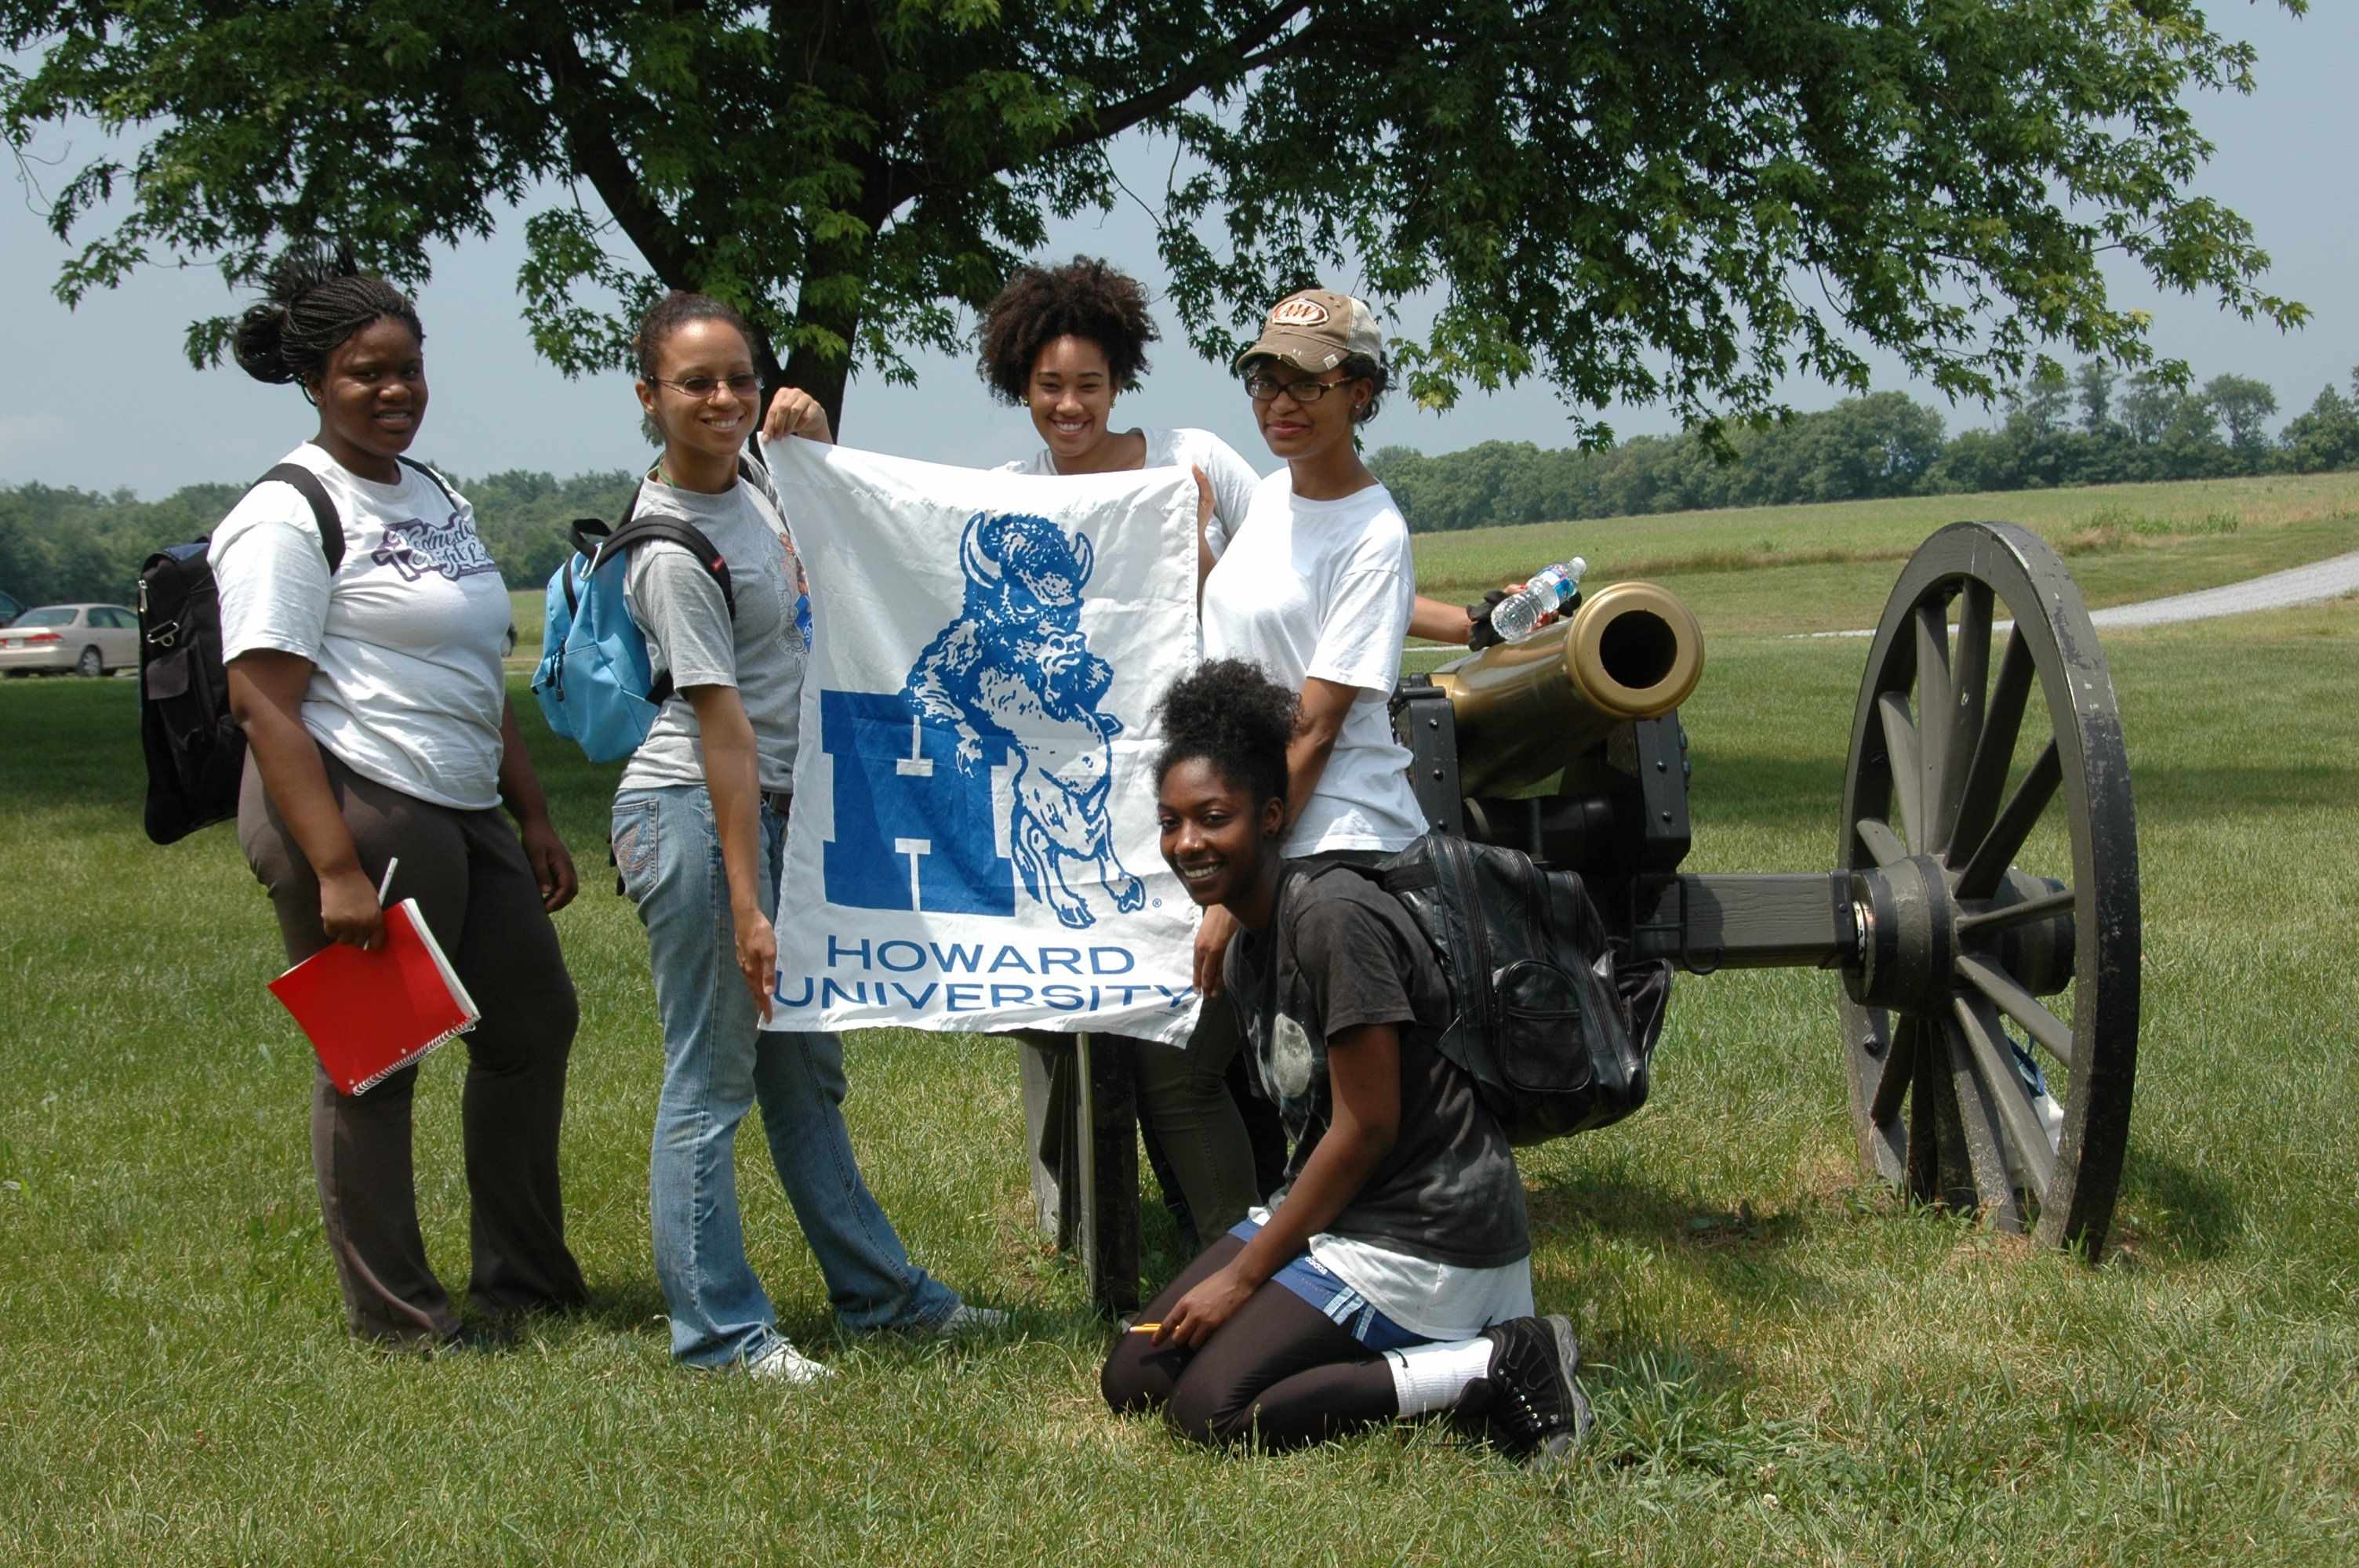 Howard University Students at the Best Farm Site